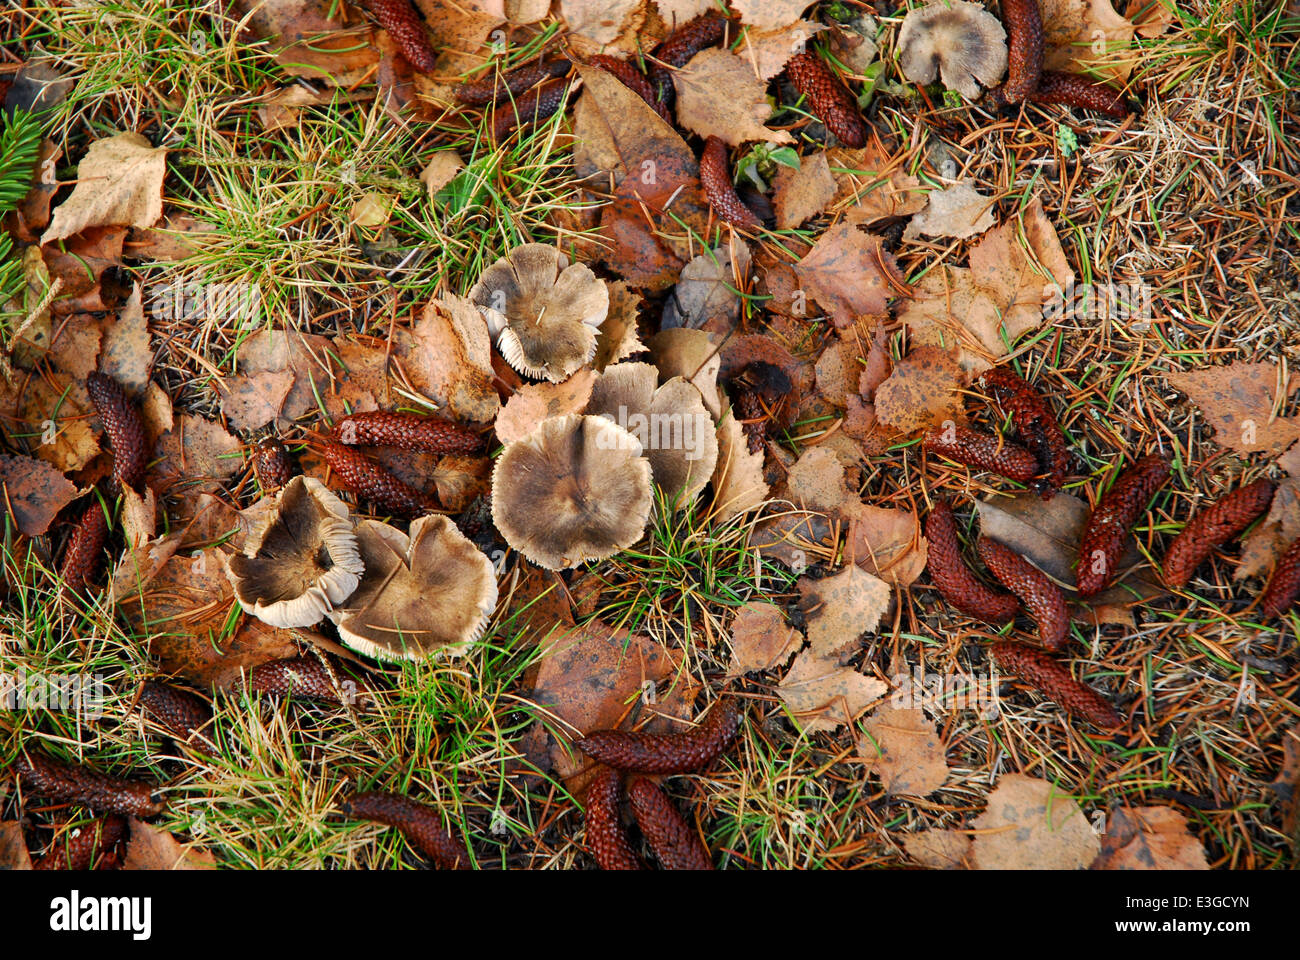 Mushrooms scattered on the ground with fallen leaves Stock Photo